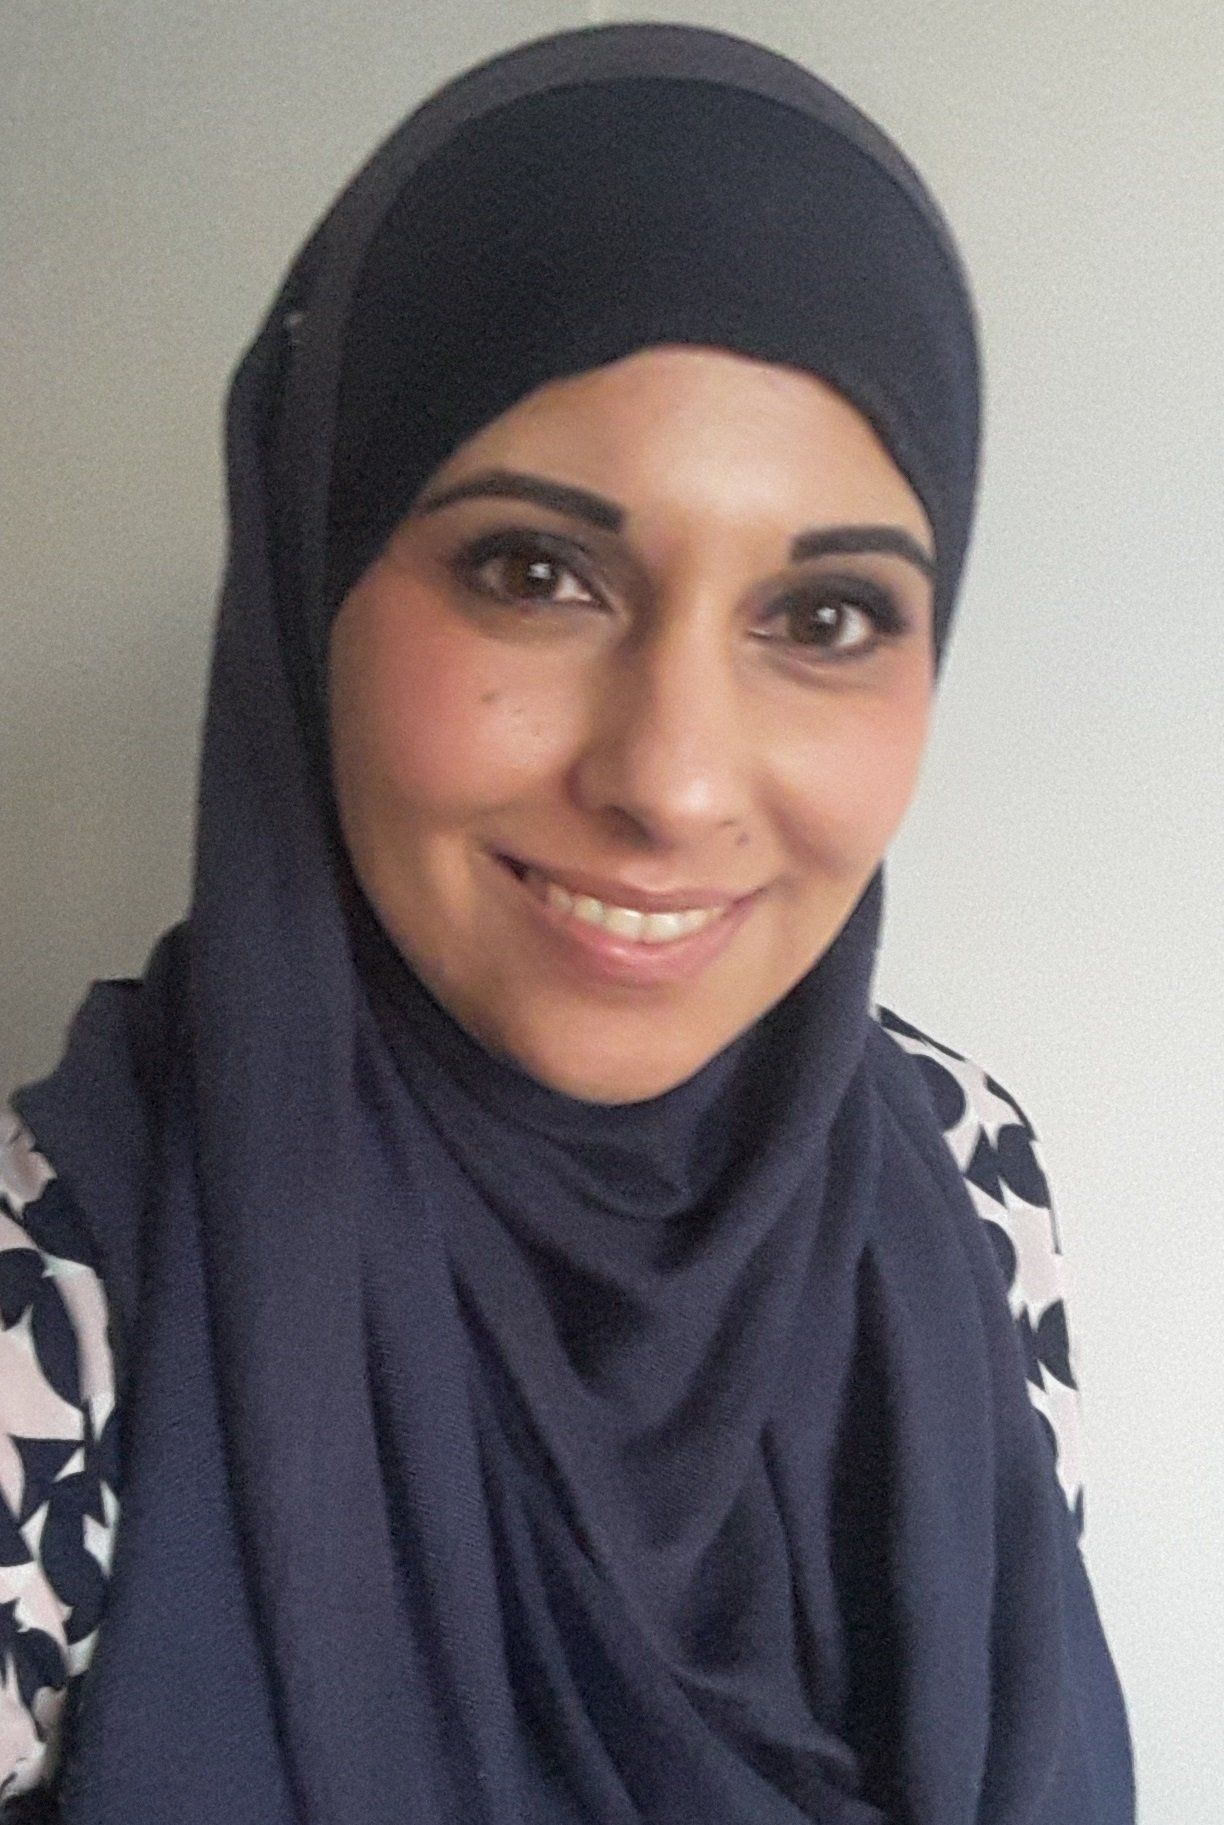 Myira Khan Counselling - BACP Accredited Counsellor in Leicester and Online